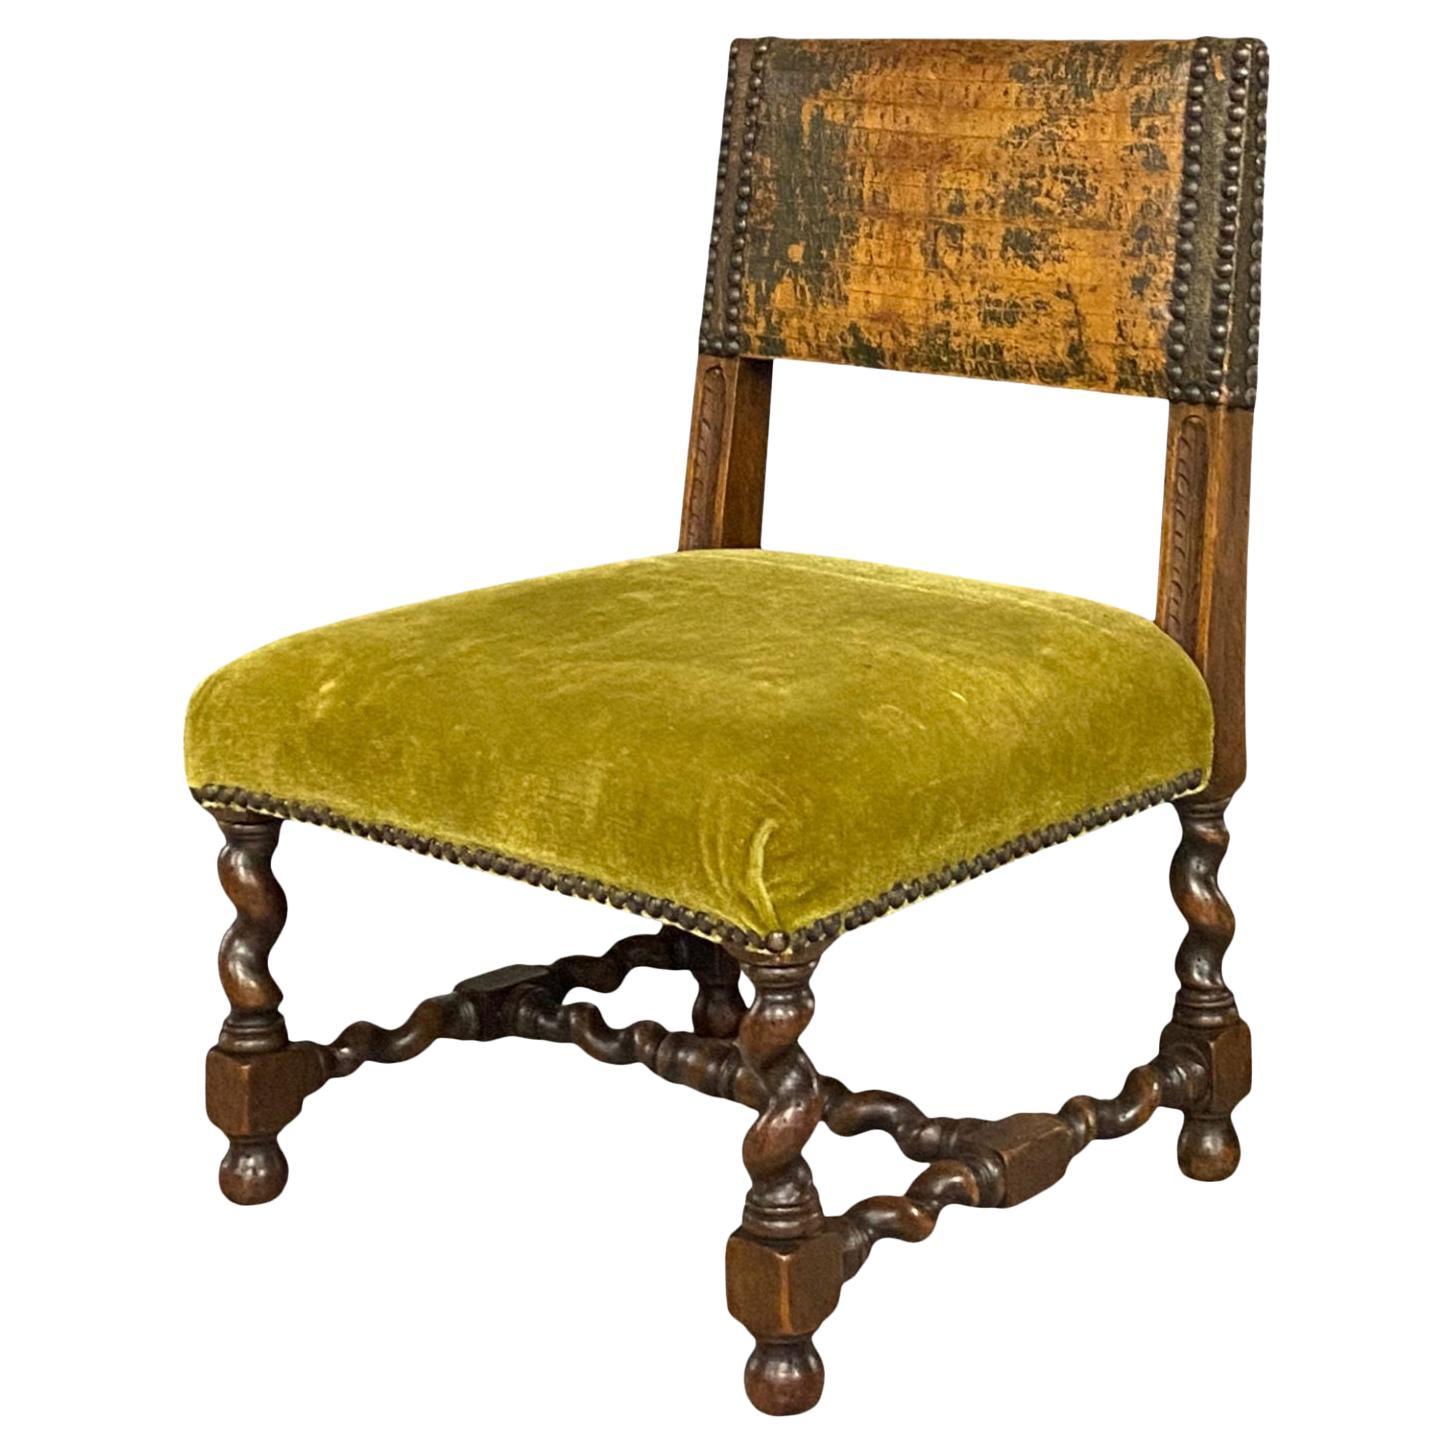 17th Century Welsh Children’s Chair Upholstered in Green Mohair and Leather